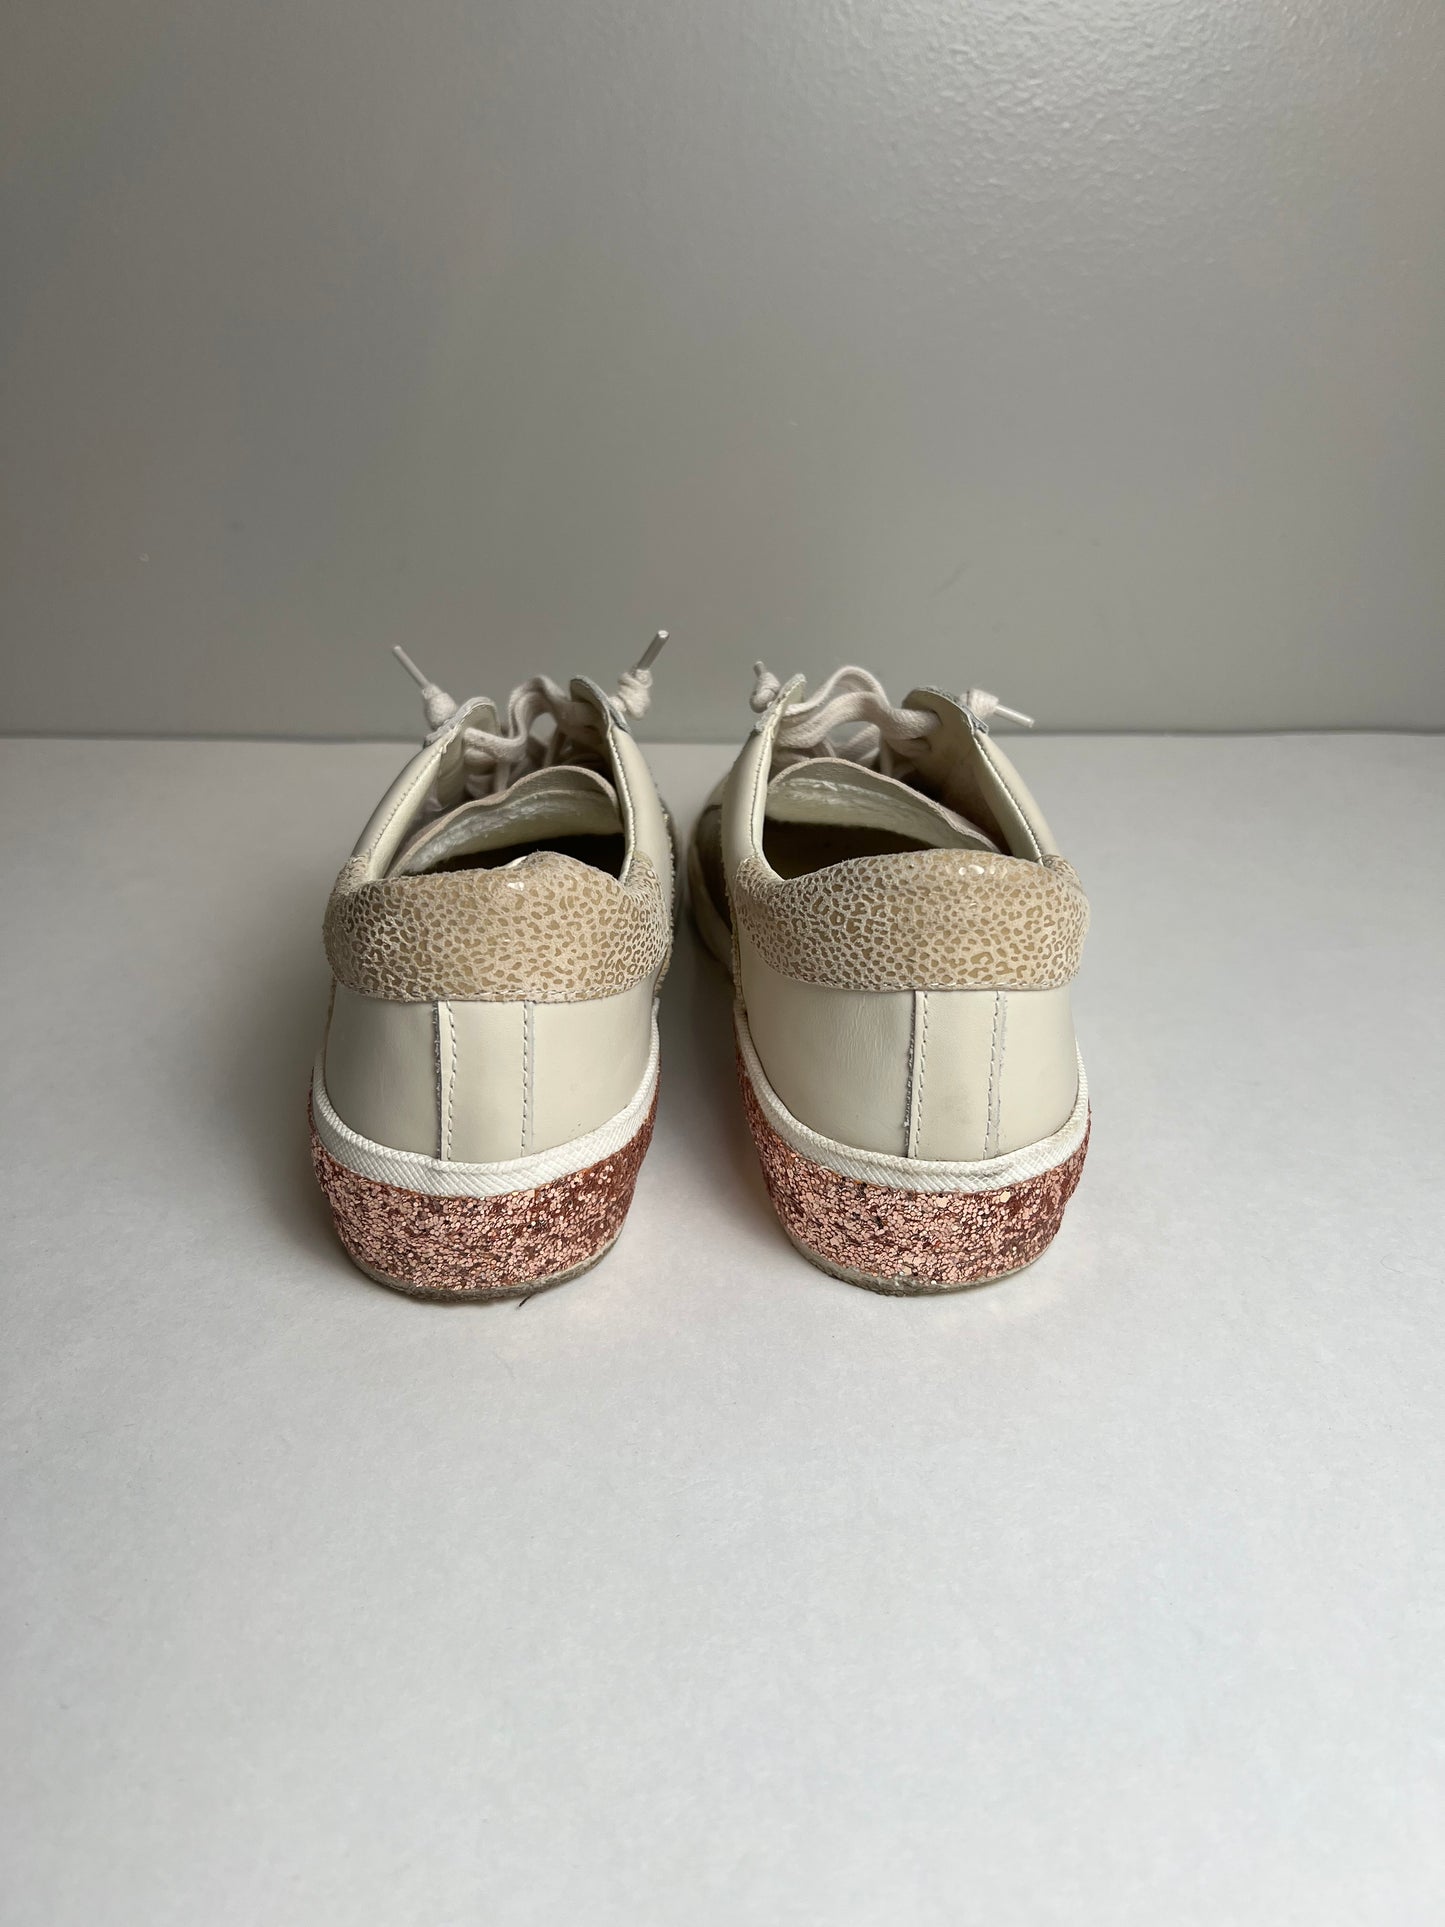 Shoes Sneakers By Dolce Vita  Size: 8.5